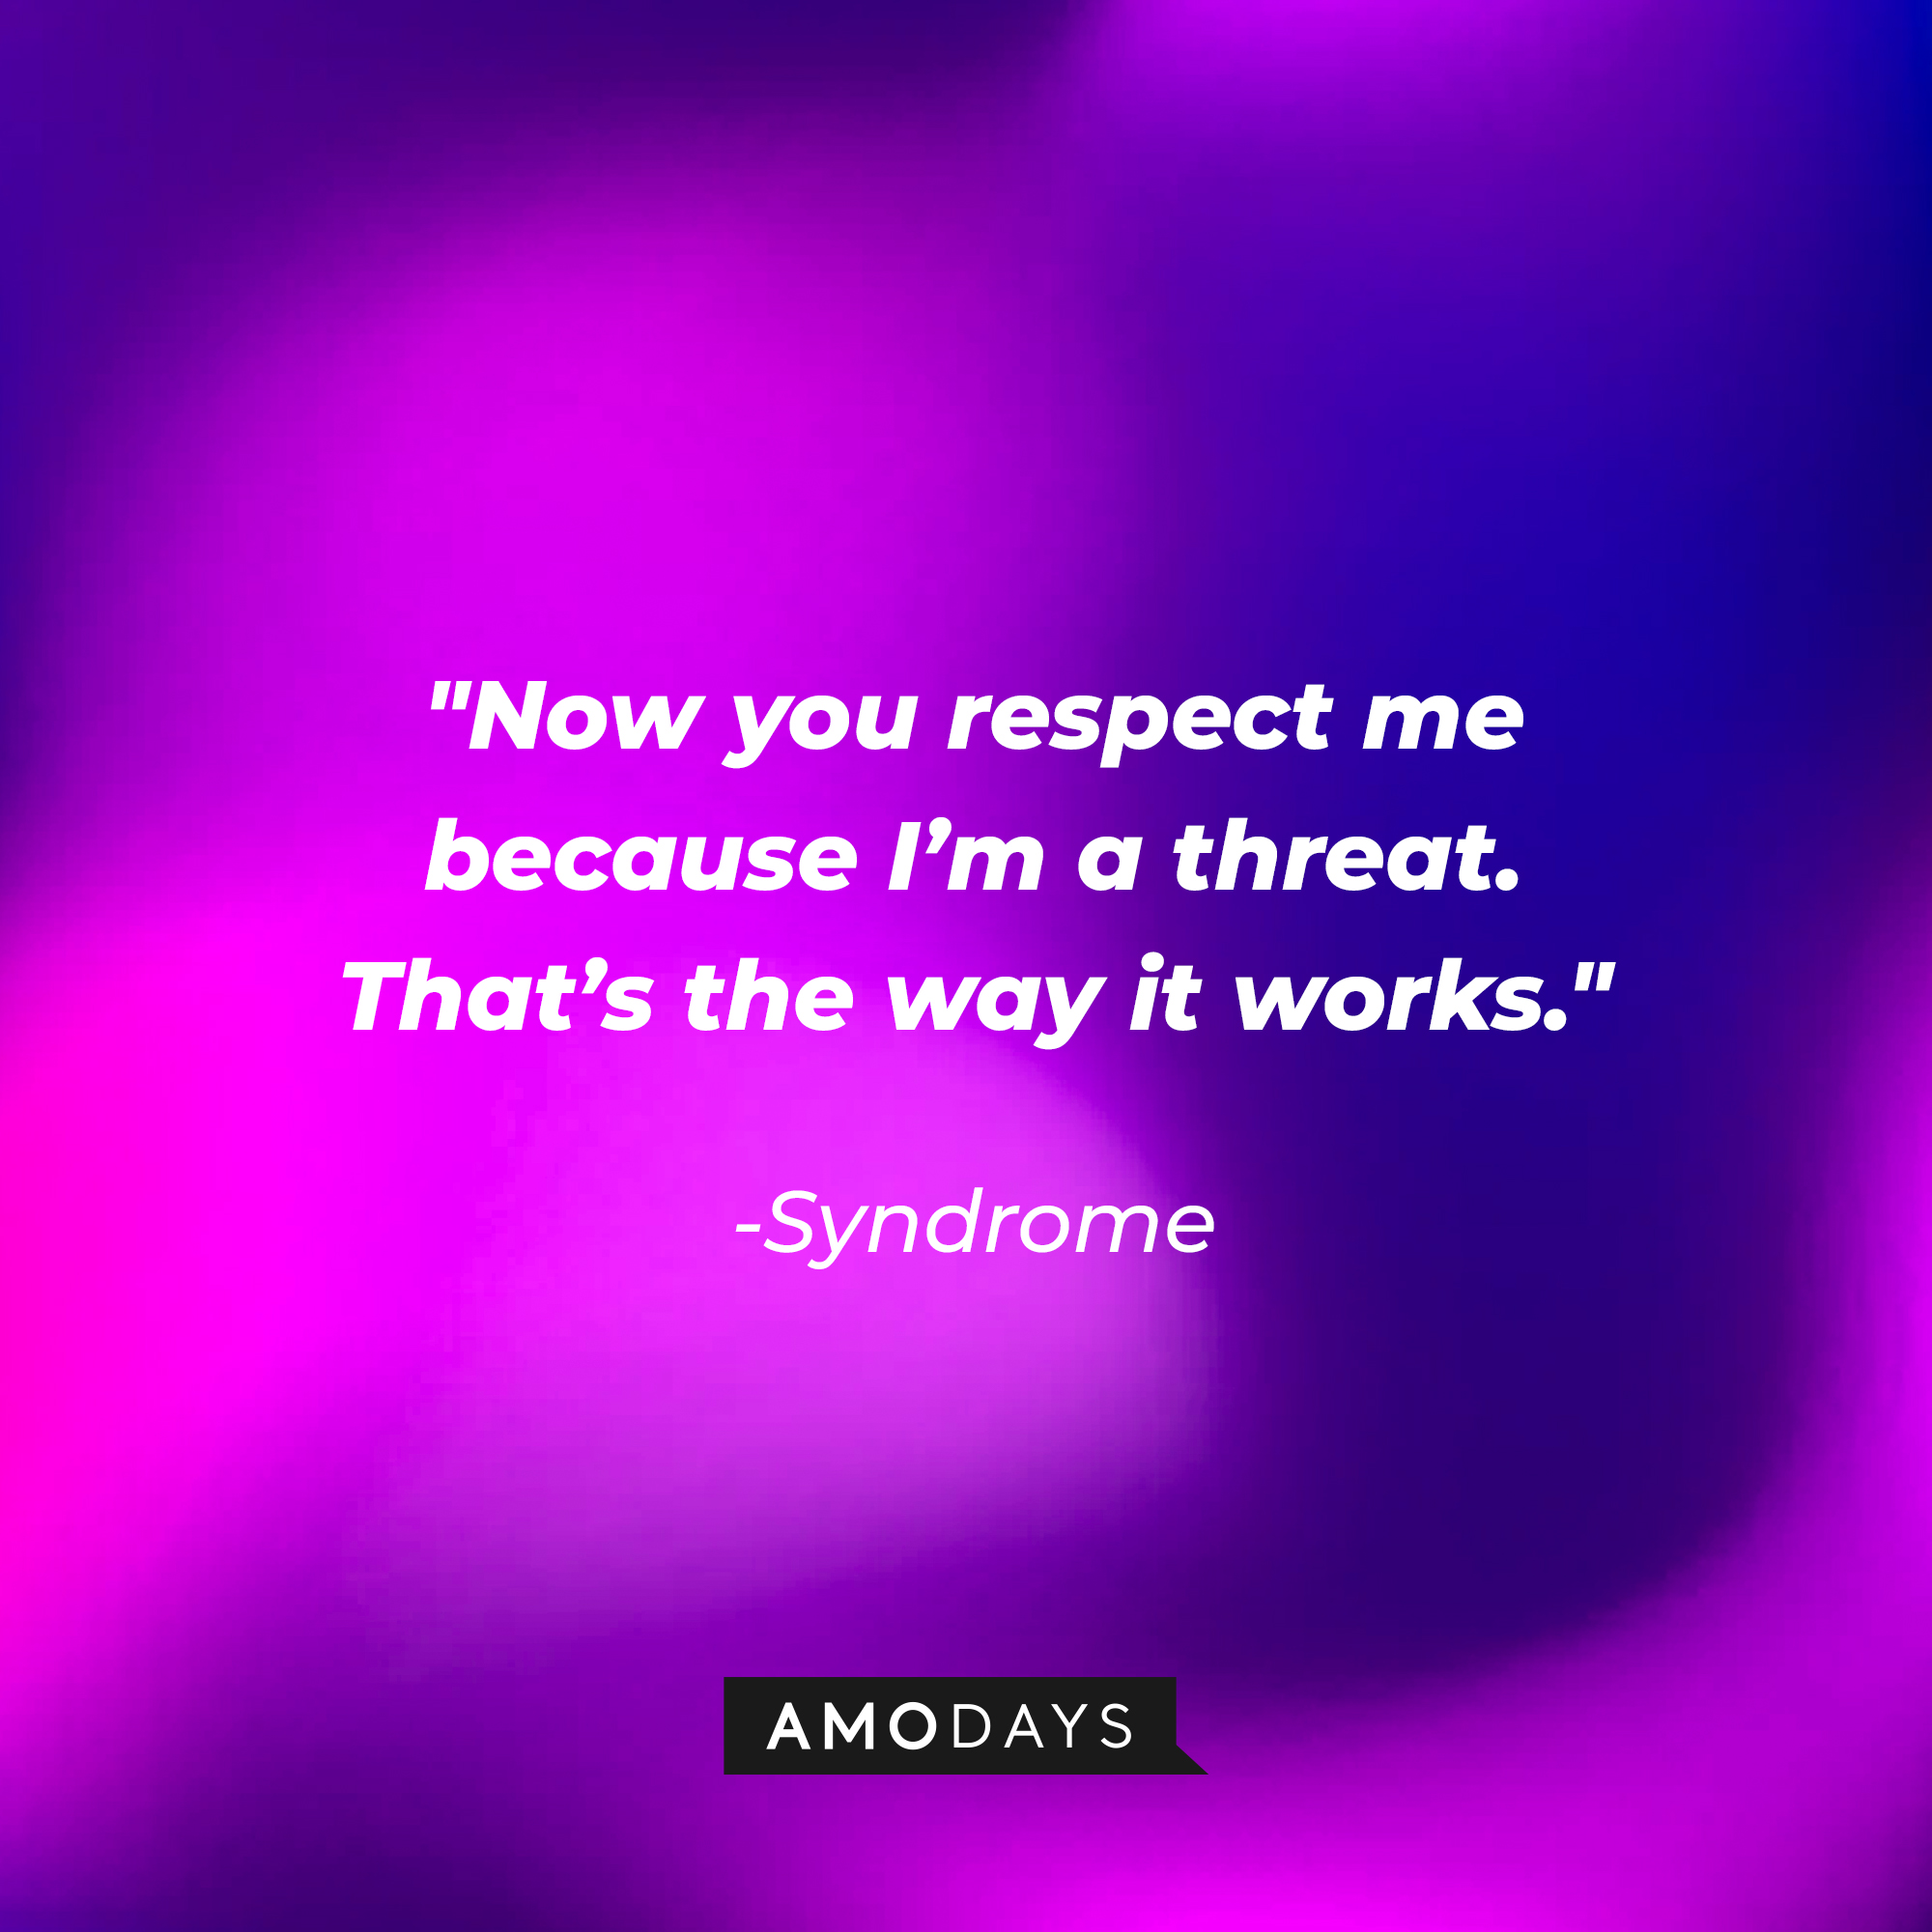 Syndrome's quote: "Now you respect me because I'm a threat. That's the way it works" | Source: Amodays